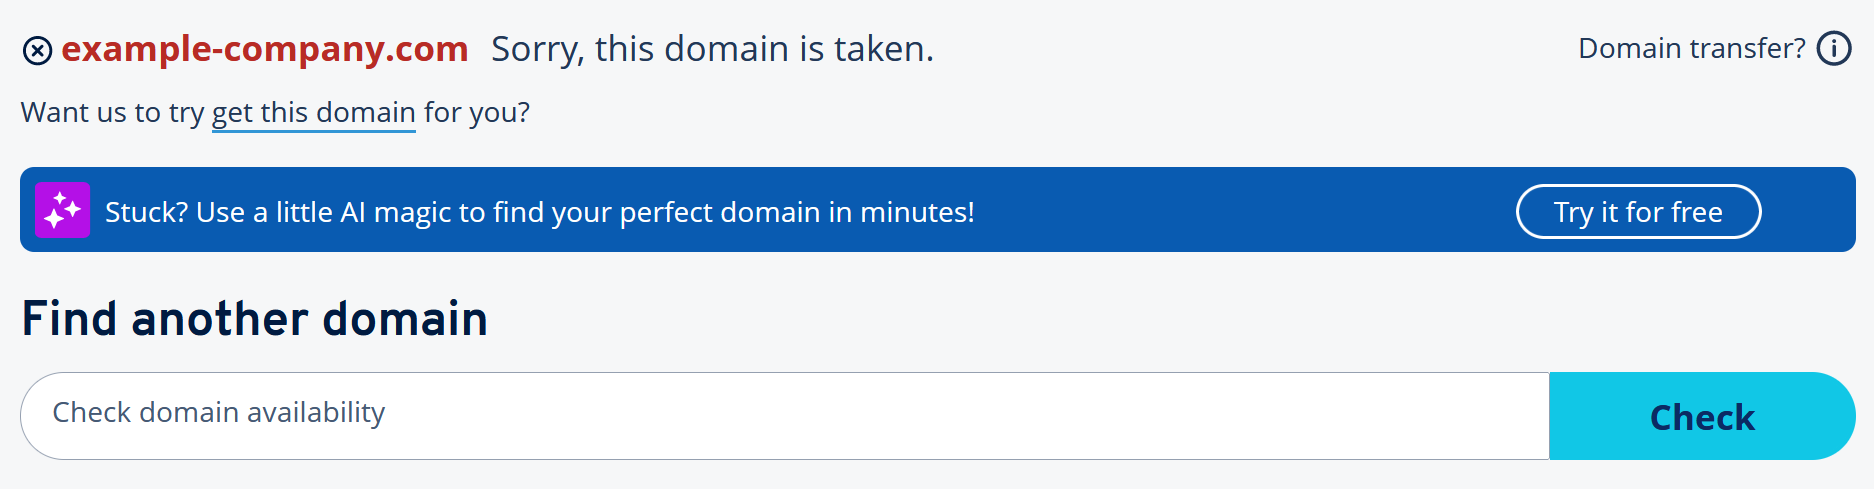 IONOS Domain Check notification stating that the domain is already taken